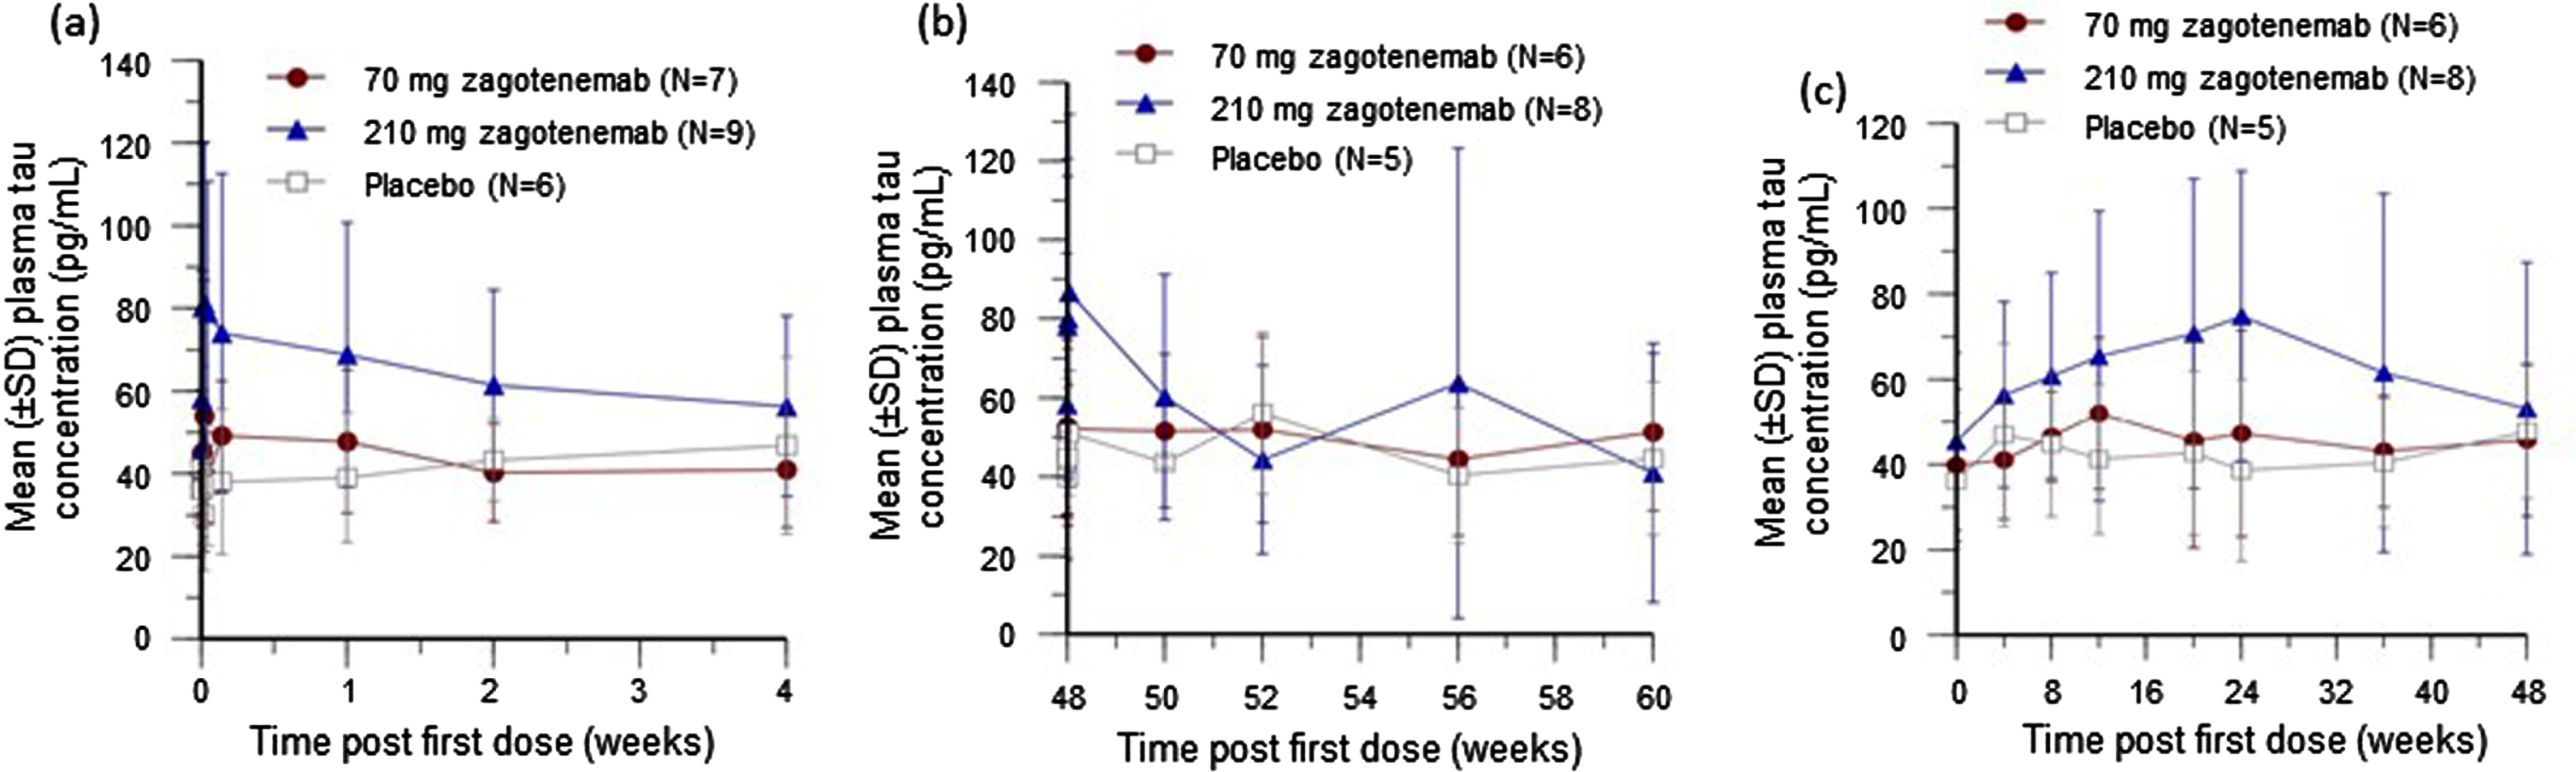 Mean plasma tau concentration-time plots after zagotenemab following a single dose (a) and completion of multiple doses (b), and mean trough plasma tau concentration-time plot after zagotenemab multiple doses (c). In (b), two participants discontinued the study after the 48-week dose. For 70 mg, N = 6 for Week 48 and N = 5 for Week 50 to Week 60. For 210 mg, N = 8 for Week 48 to Week 56 and N = 7 for Week 60. In (c), samples were obtained prior to next dose (4 weeks after previous dose). N, number of participants; SD, standard deviation.